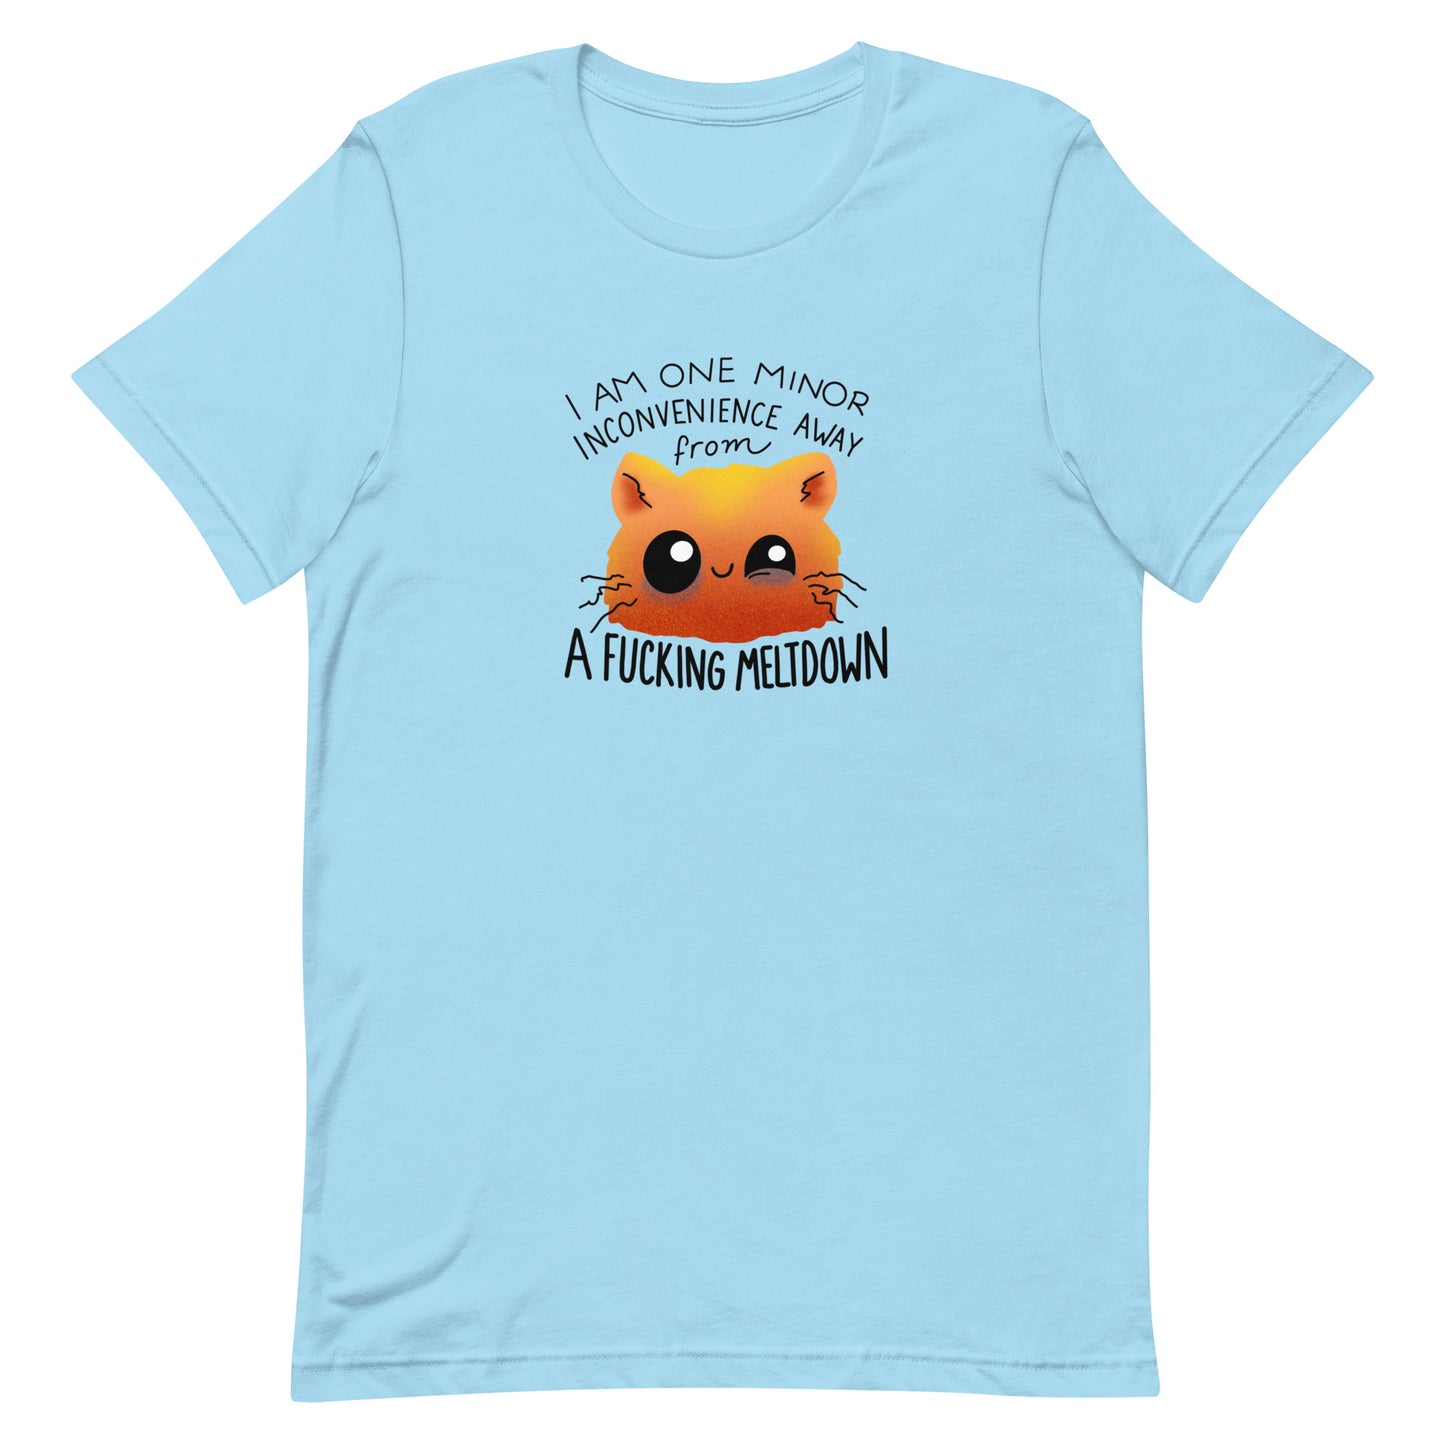 I am One Minor Inconvenience from a Fucking Meltdown T-Shirt